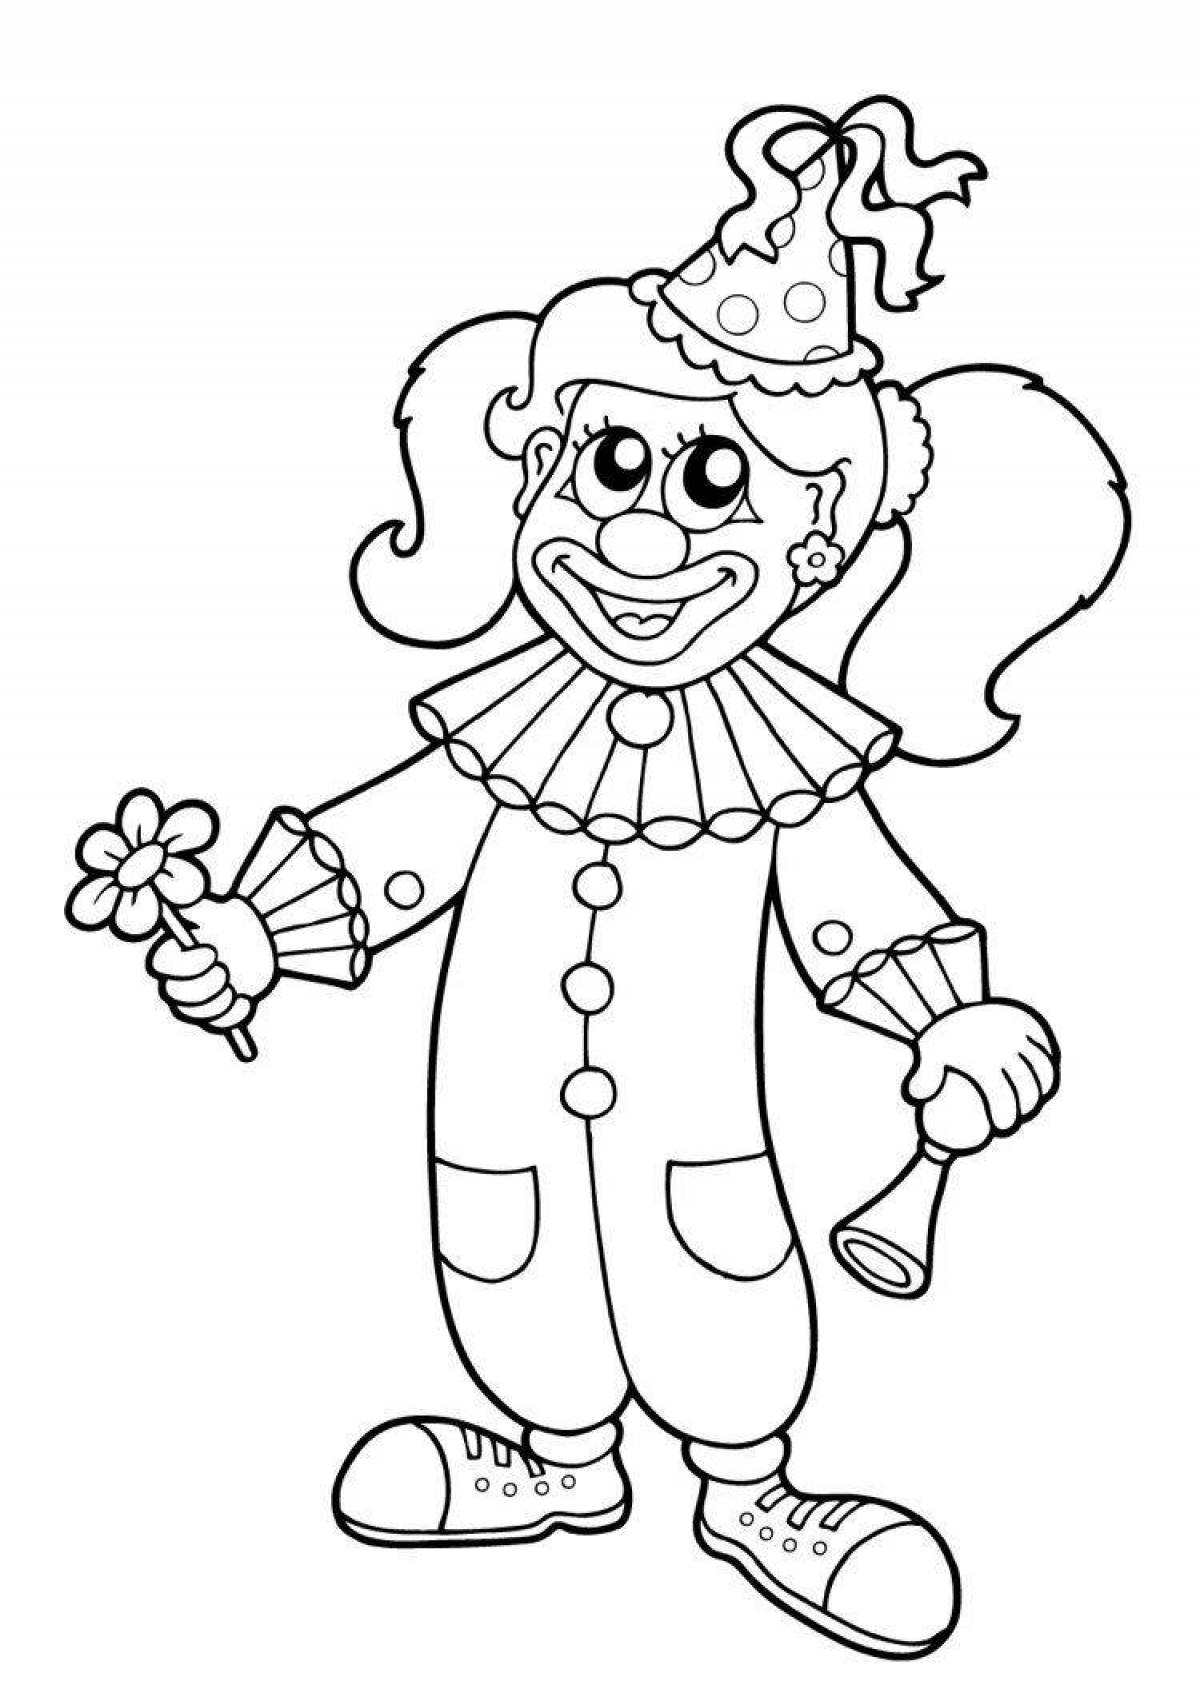 Bright clown coloring book for 6-7 year olds